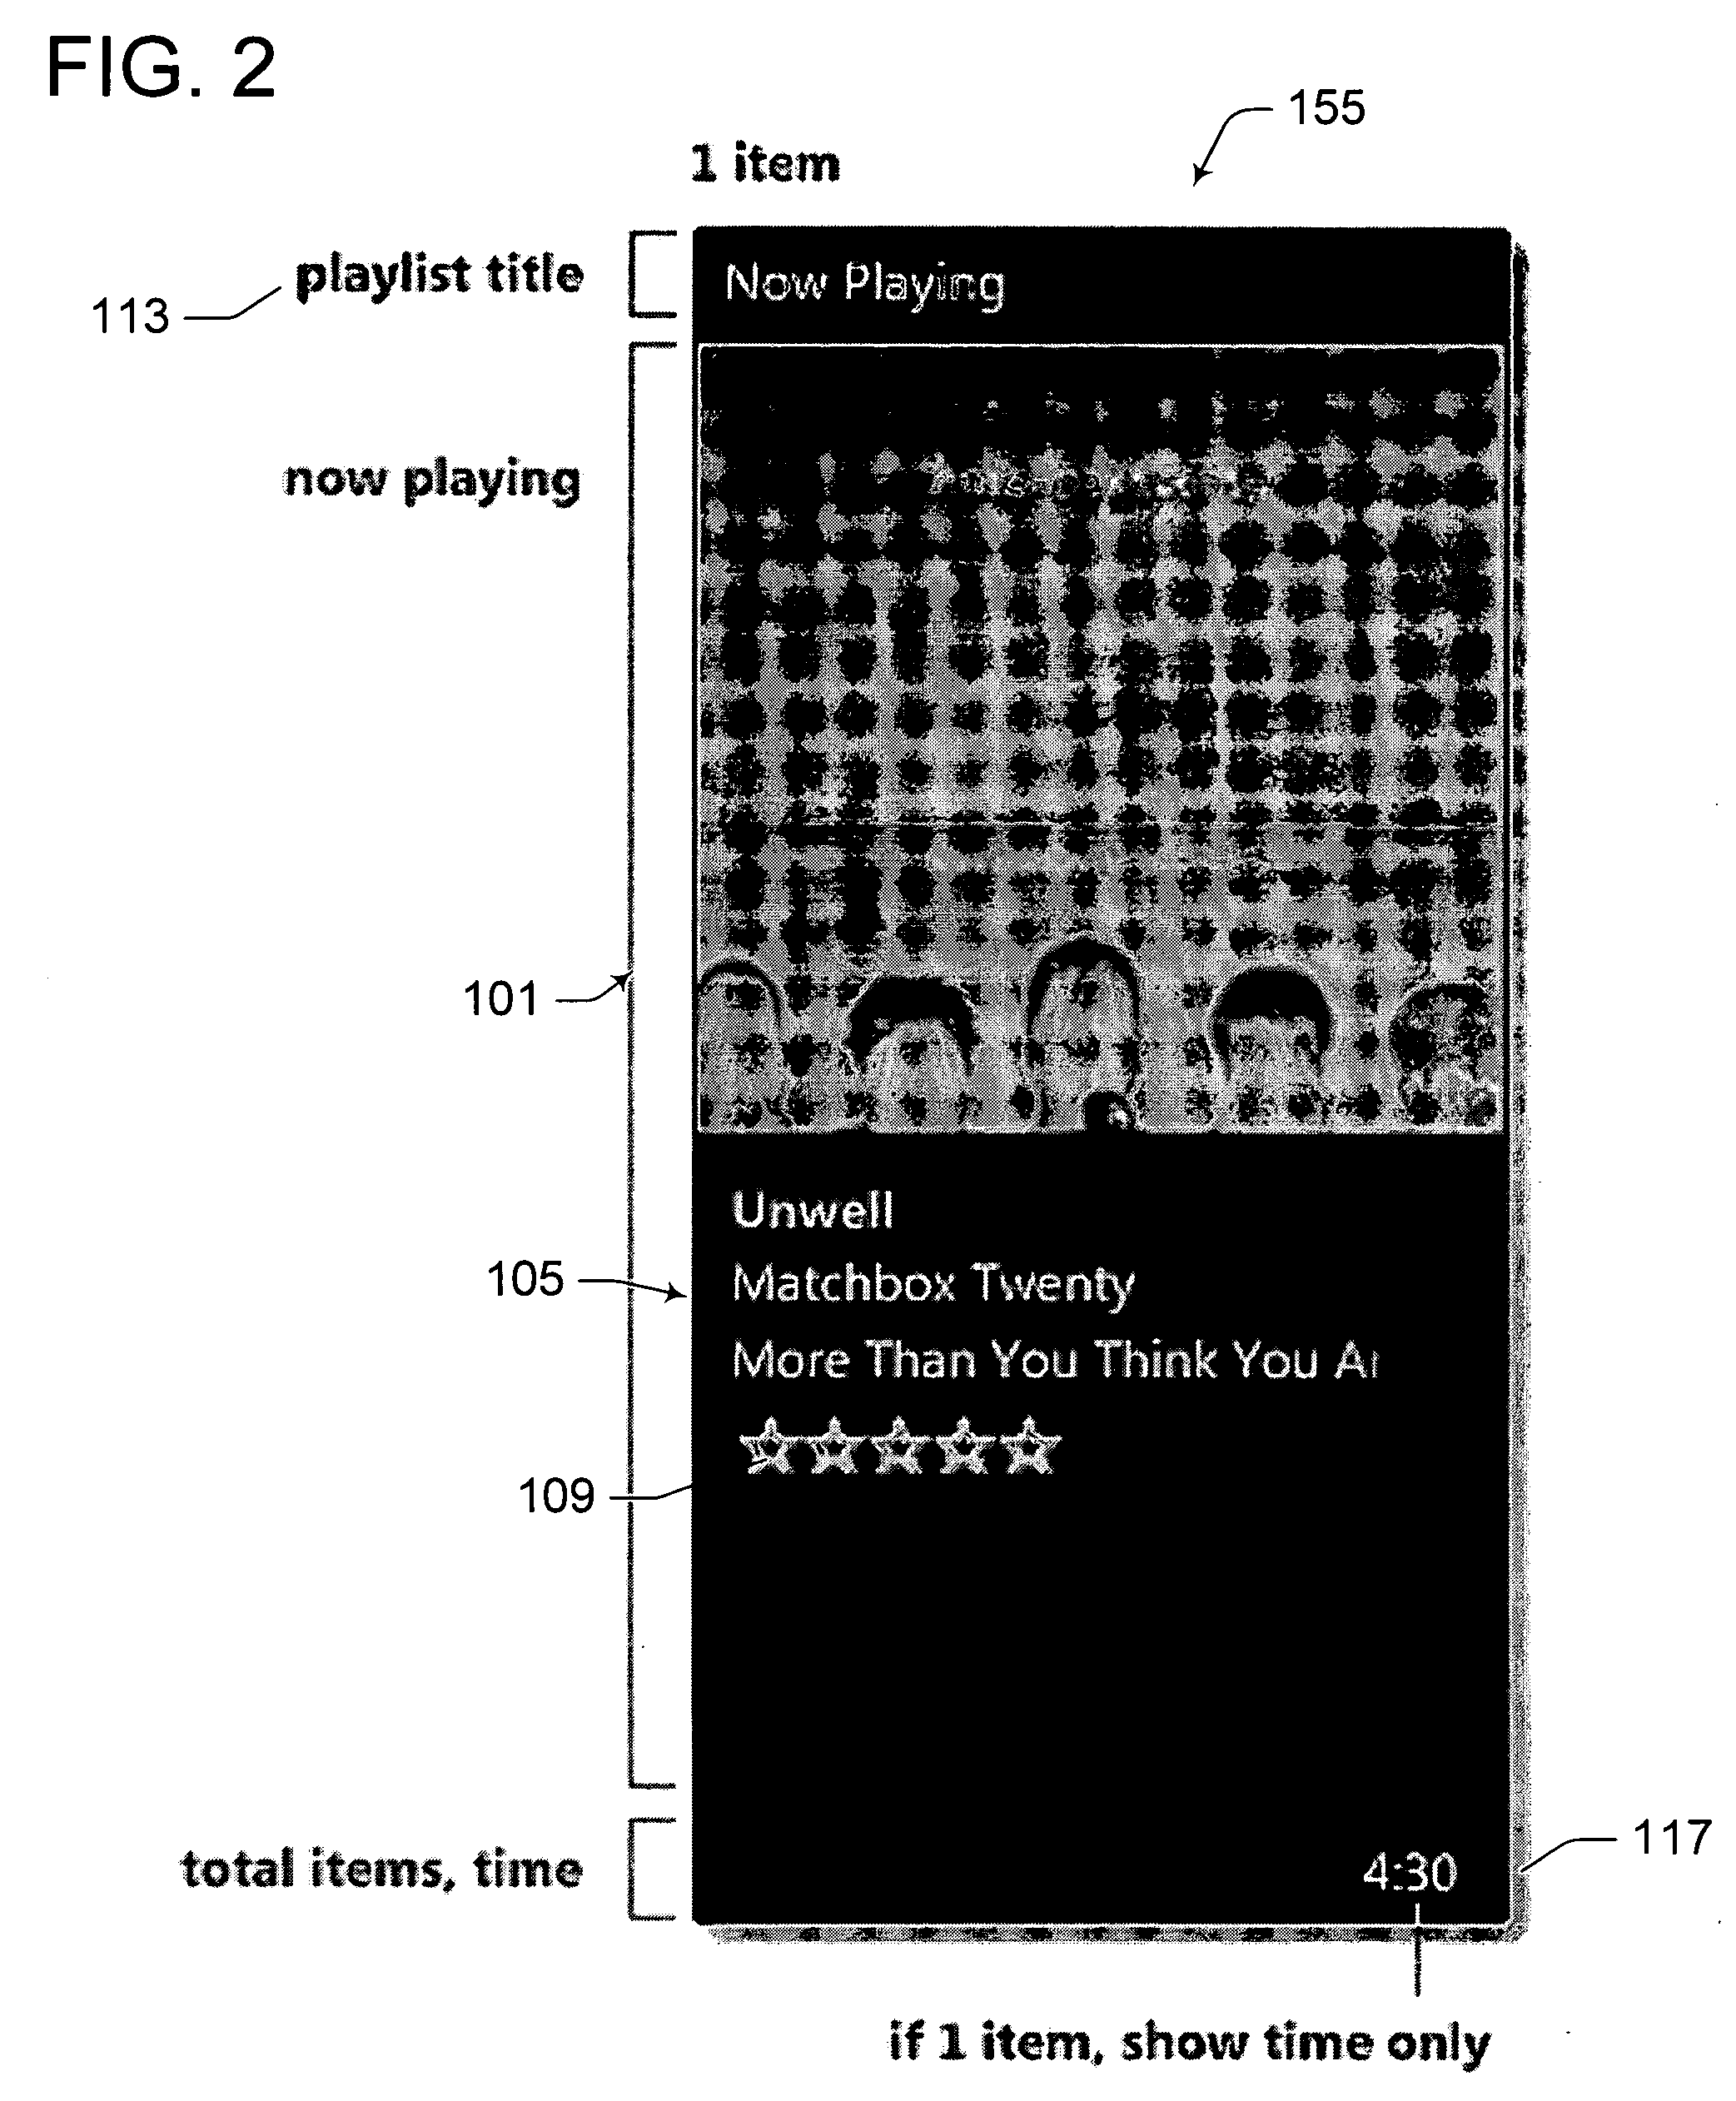 Methods and systems for generating a subgroup of one or more media items from a library of media items